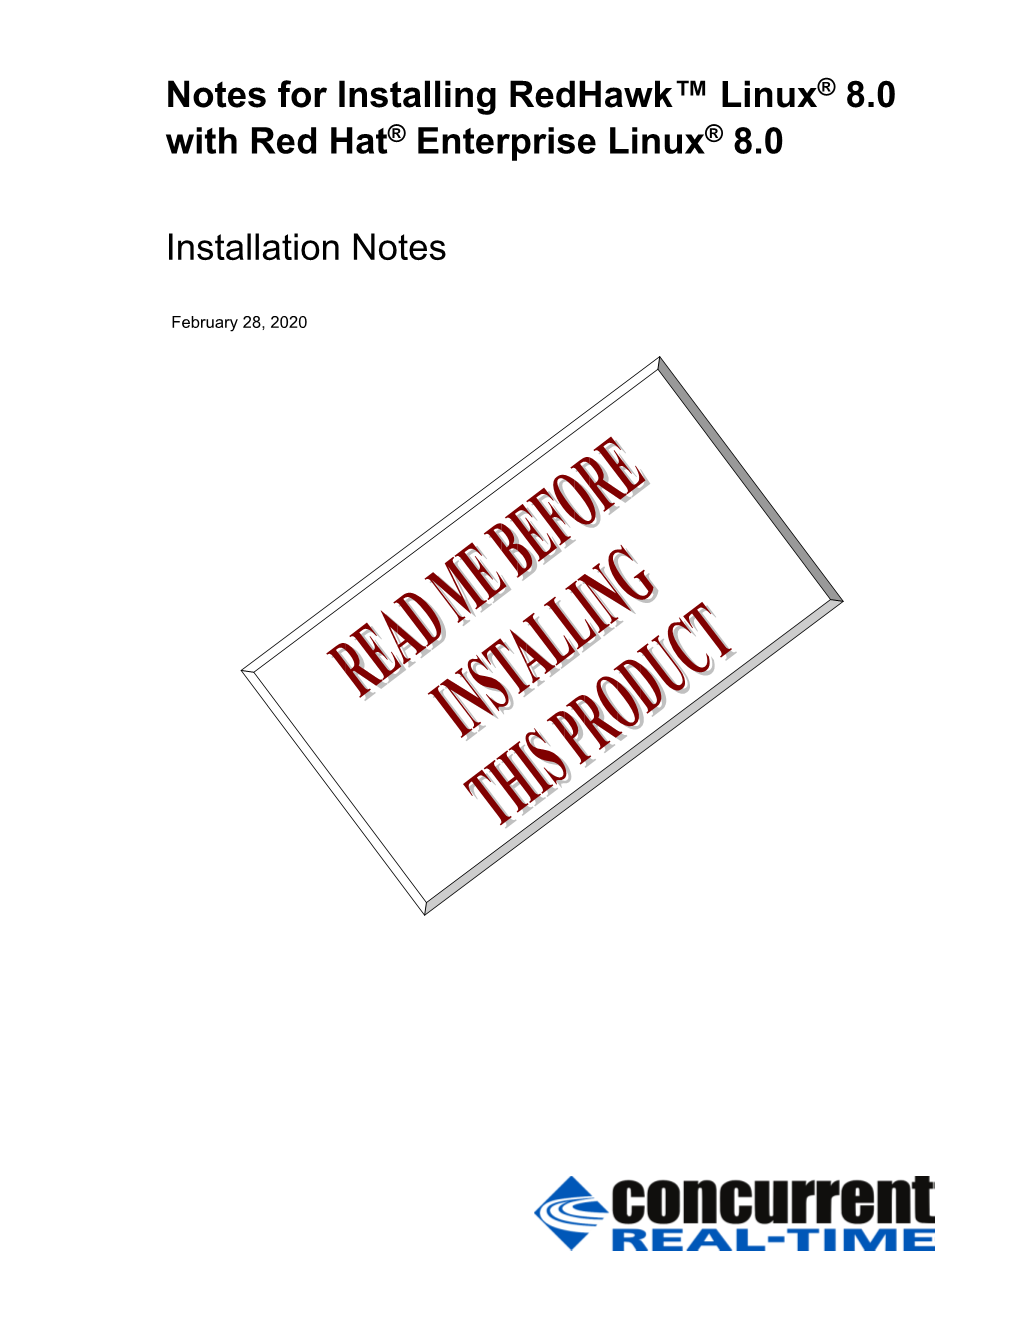 Notes for Installing Redhawk™ Linux® 8.0 with Red Hat® Enterprise